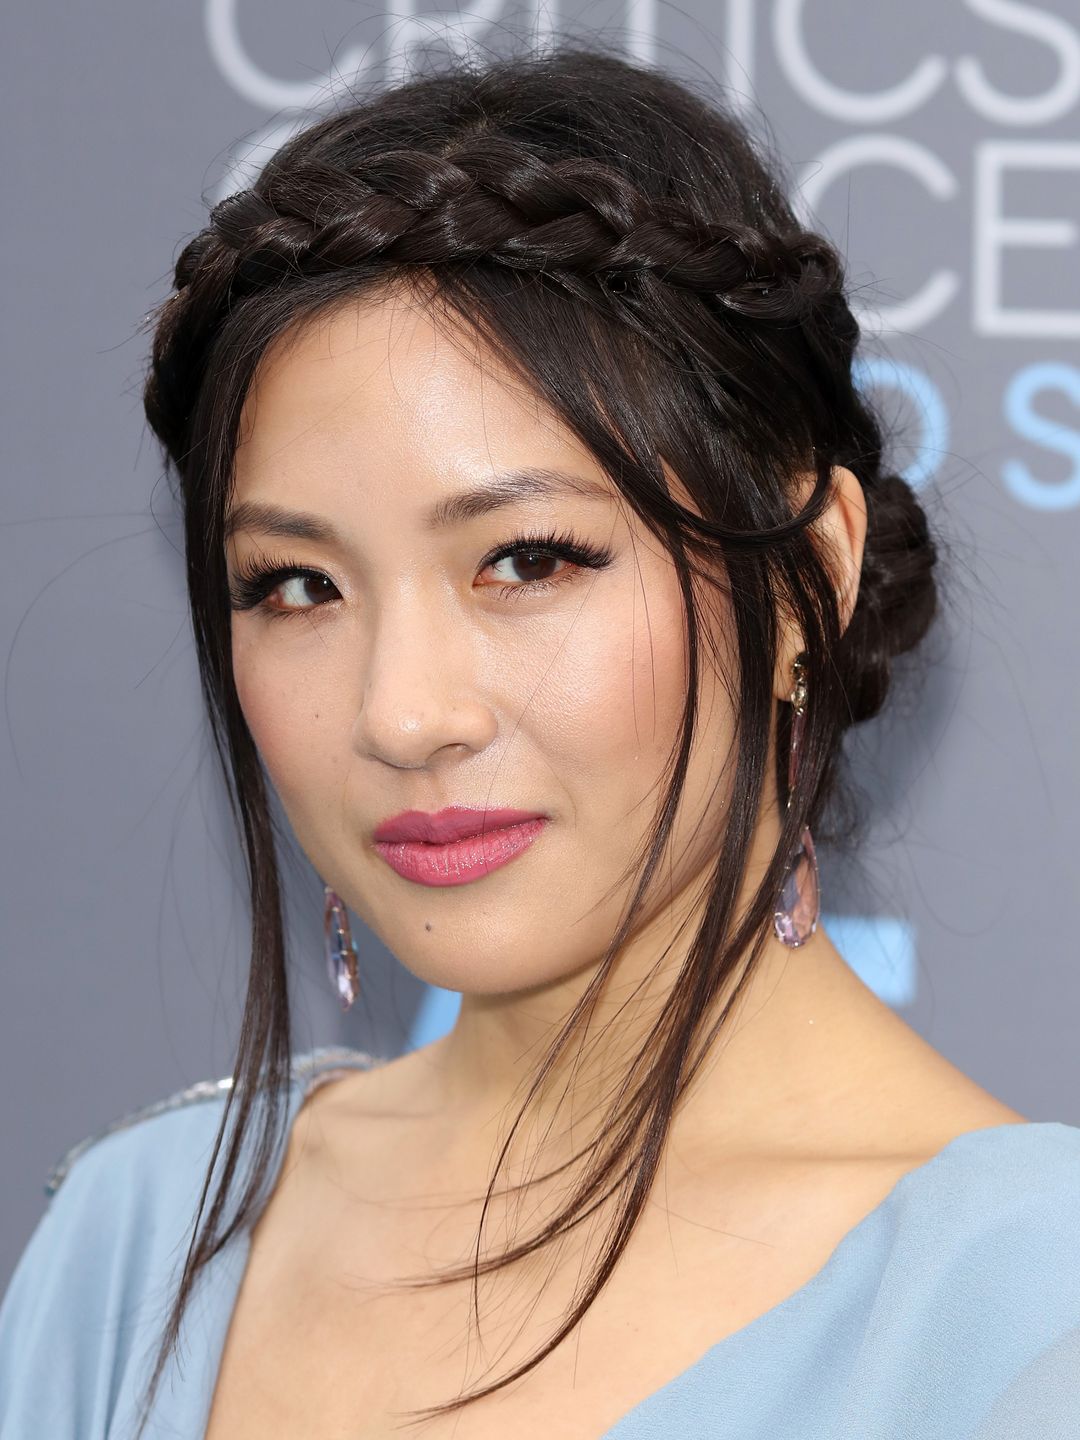 Constance Wu education